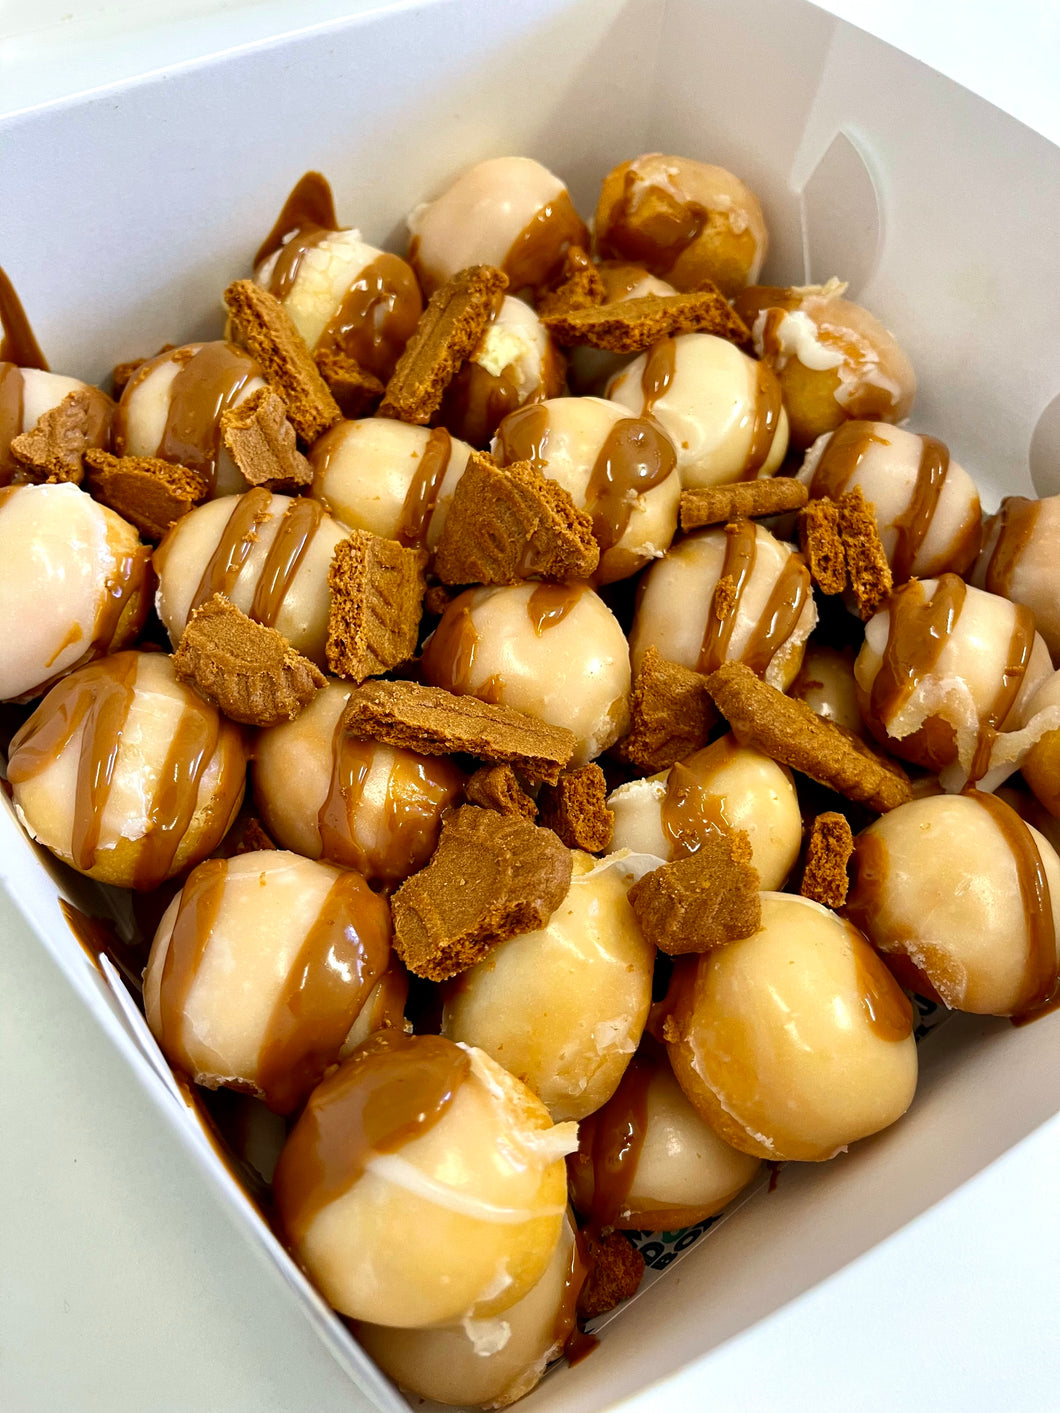 Biscoff Donut Hole Share Pack